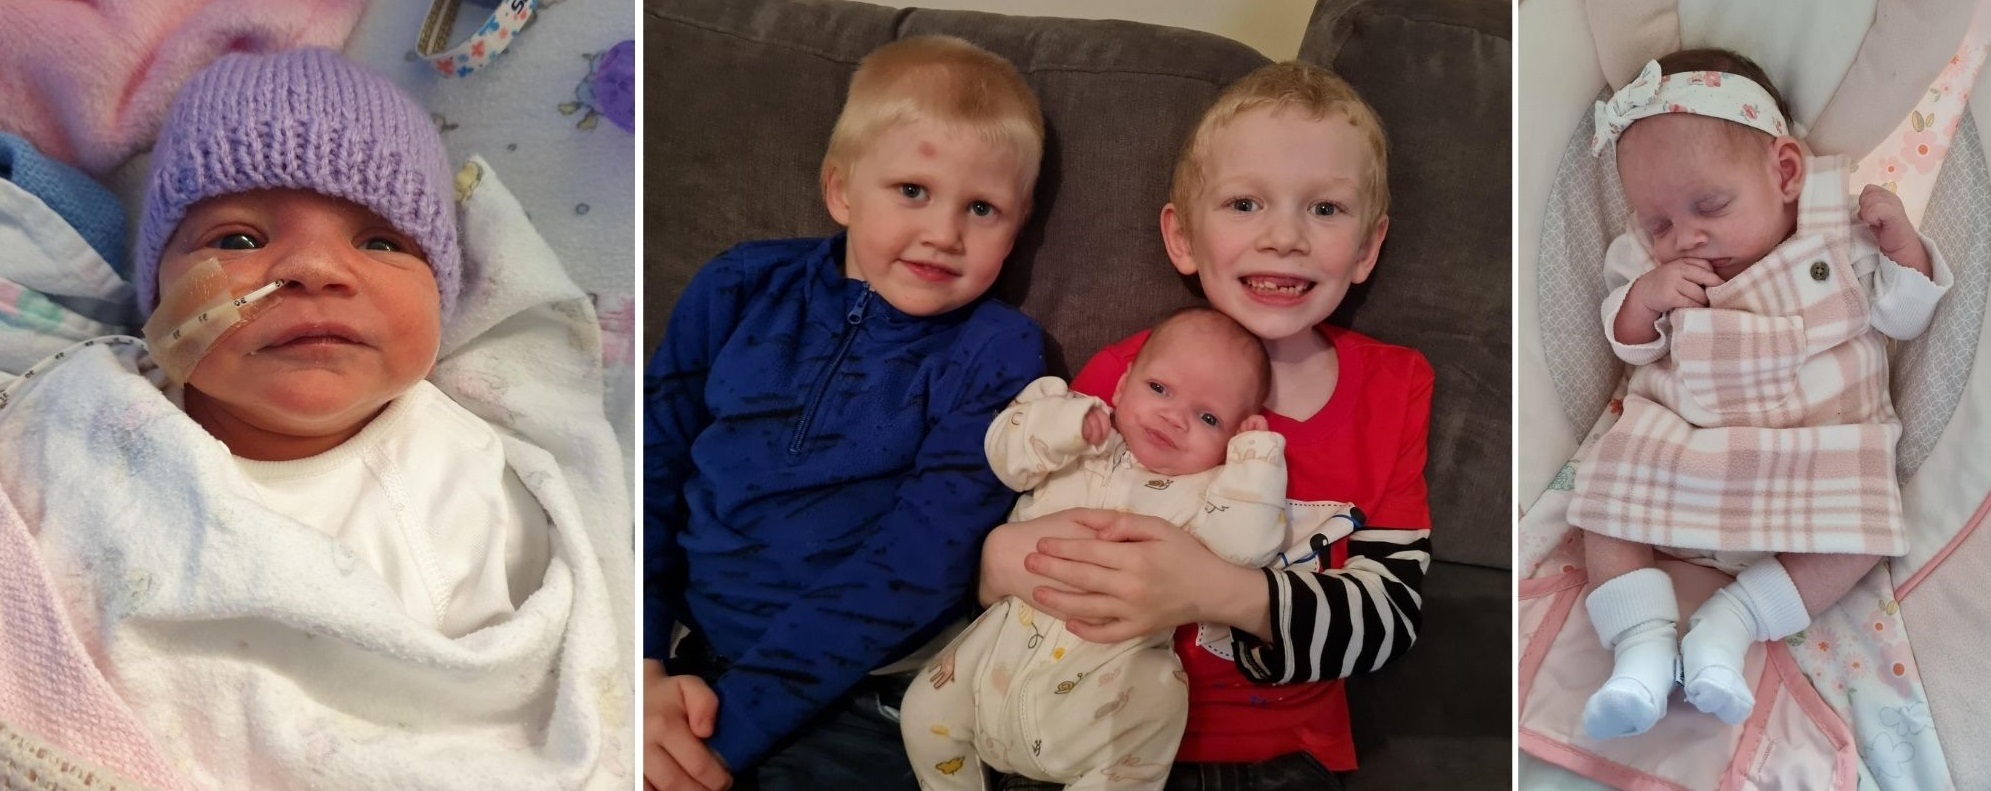 Imogen Mary Healey, pictured with brothers Connor and Kai.